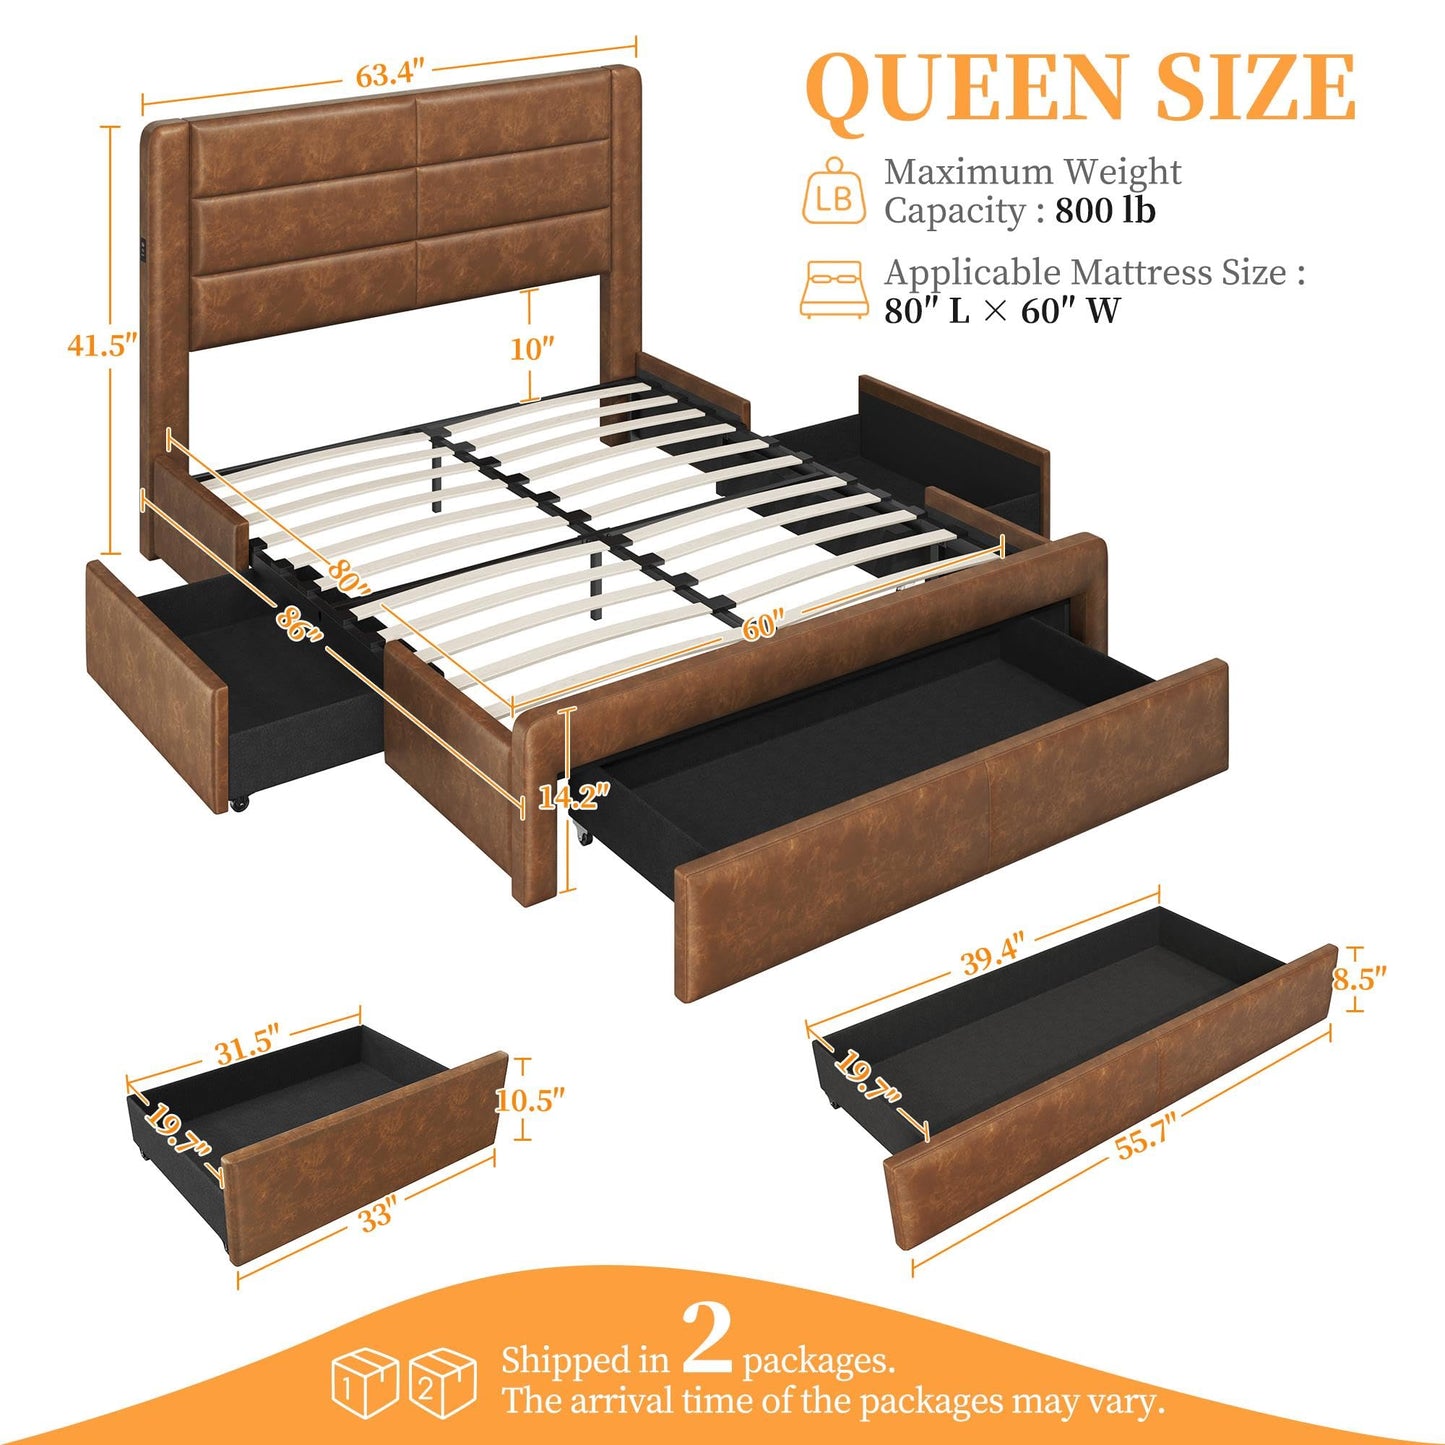 Yaheetech Queen Bed Frame with 2 USB Charging Stations/Port for Type A&Type C/3 Storage Drawers,Leather Upholstered Platform Bed with Headboard/Solid